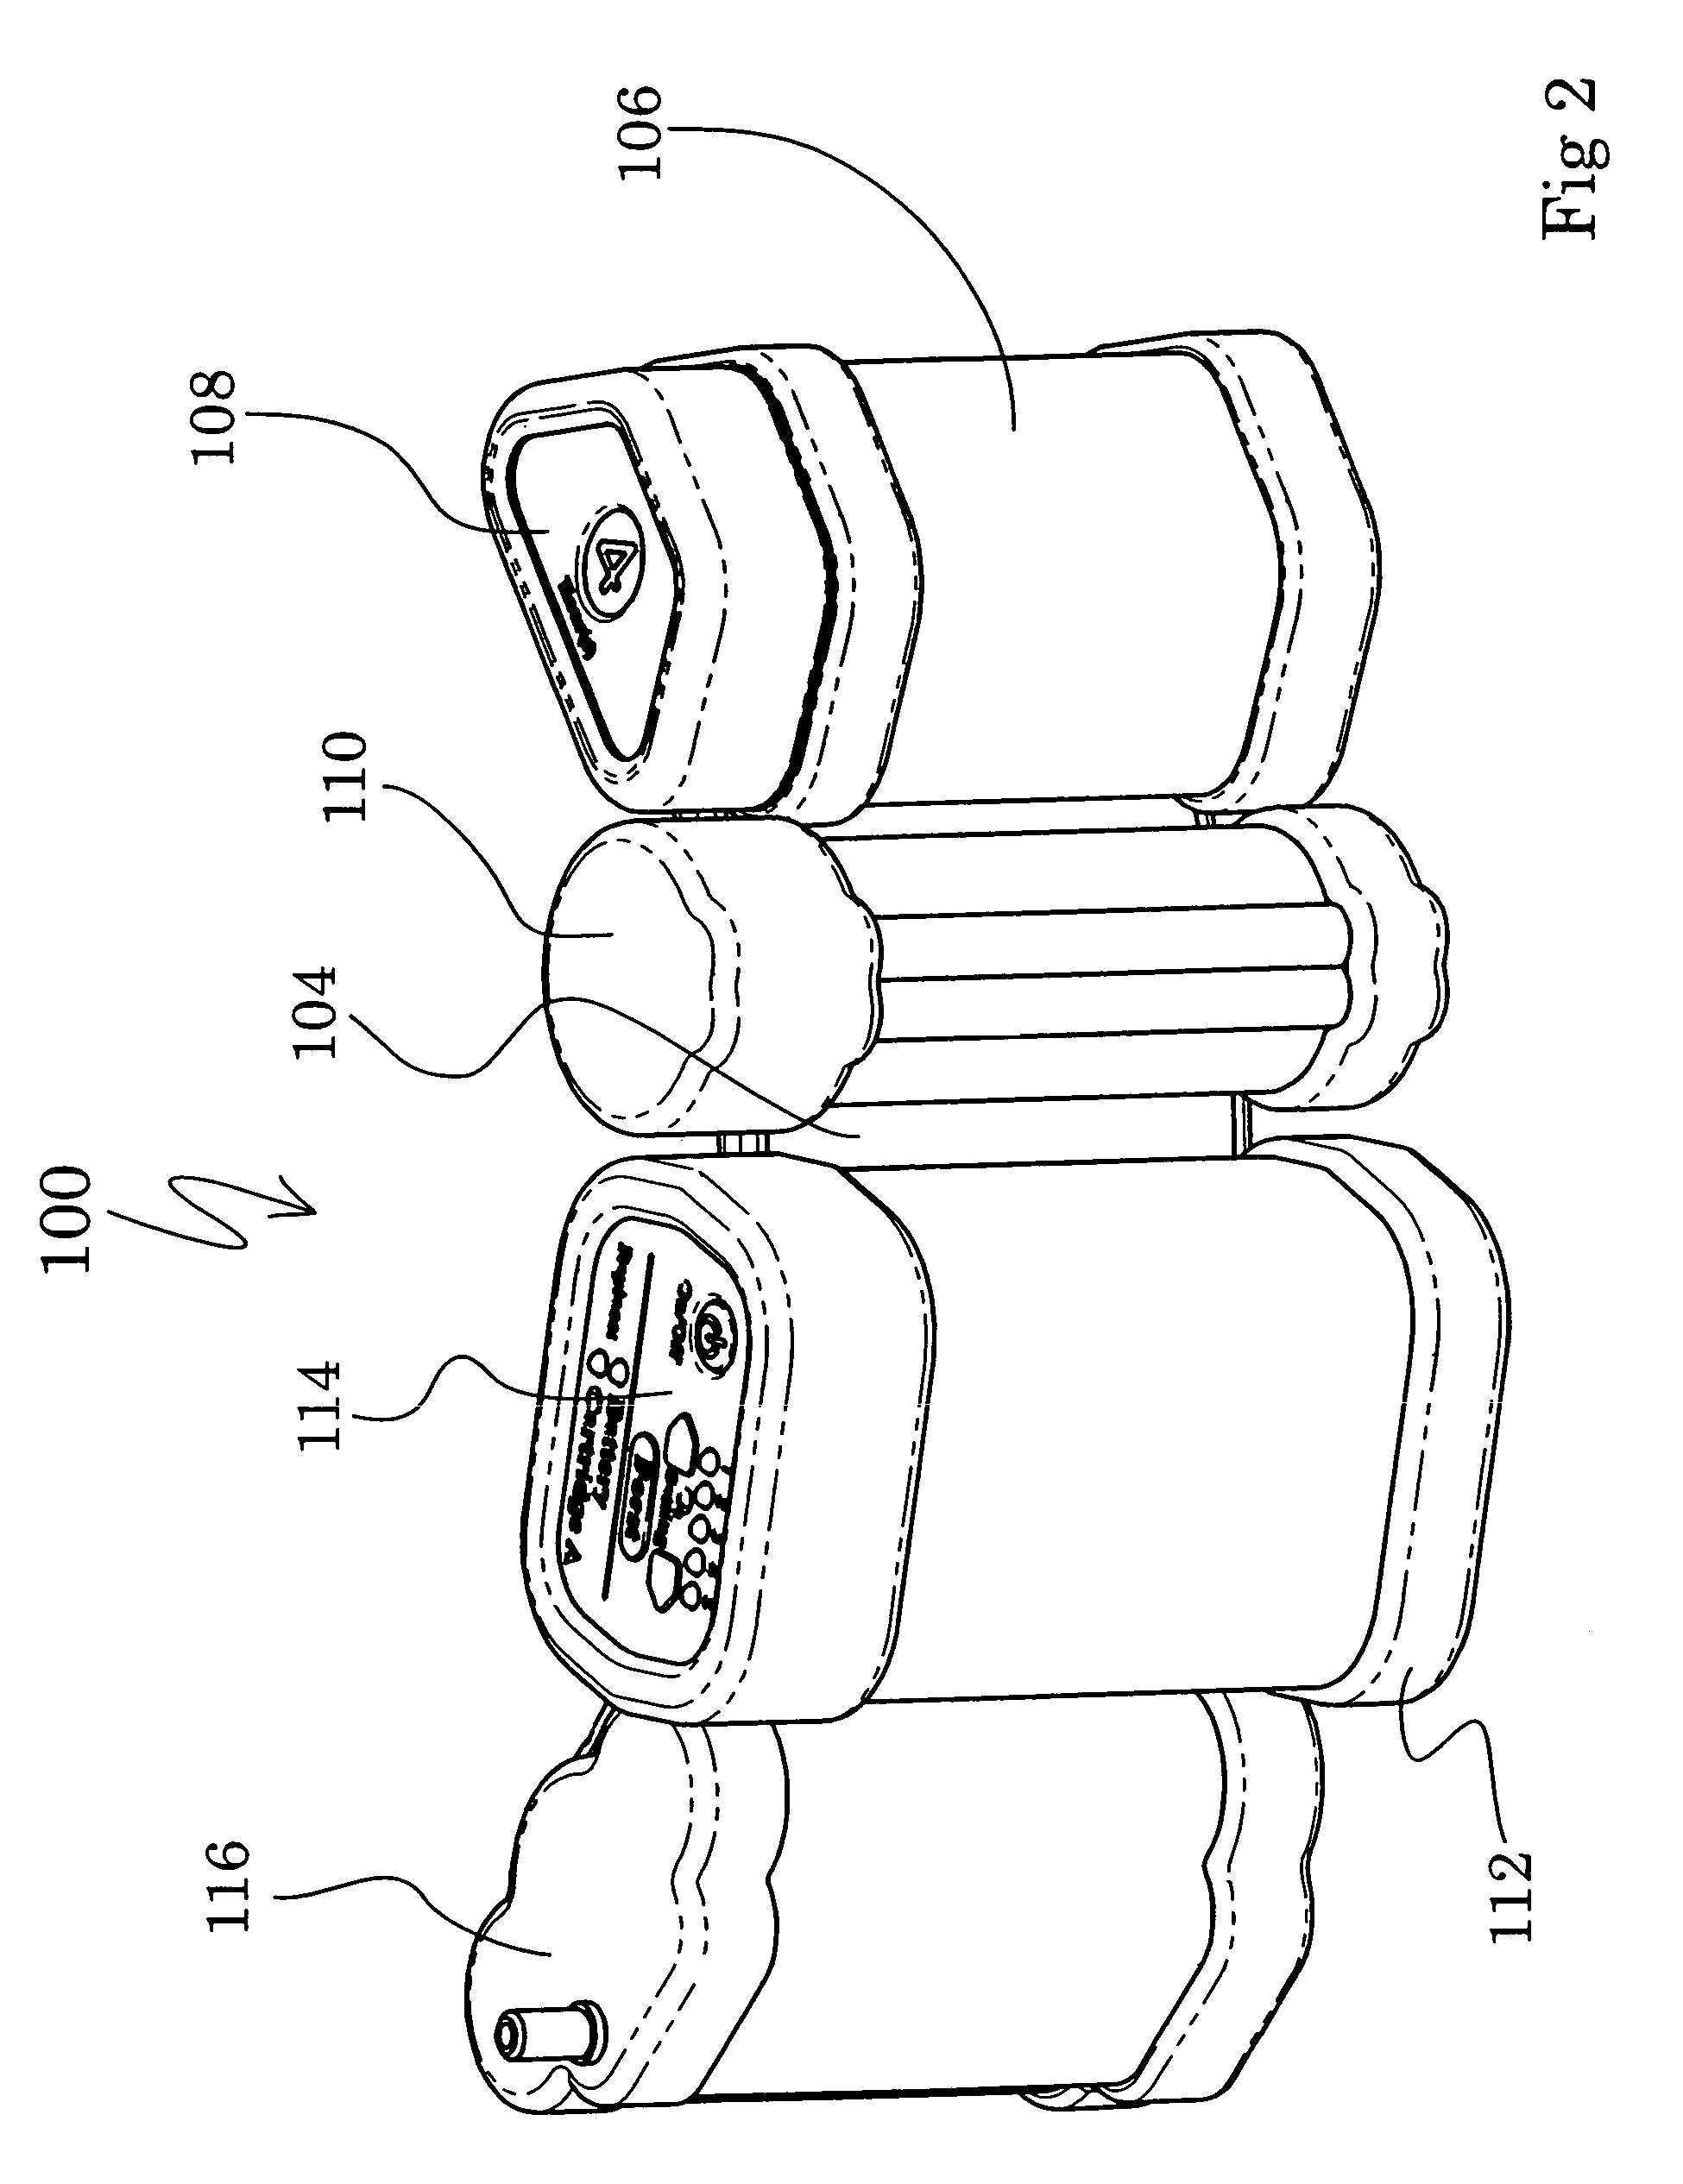 Method of controlling the rate of oxygen produced by an oxygen concentrator